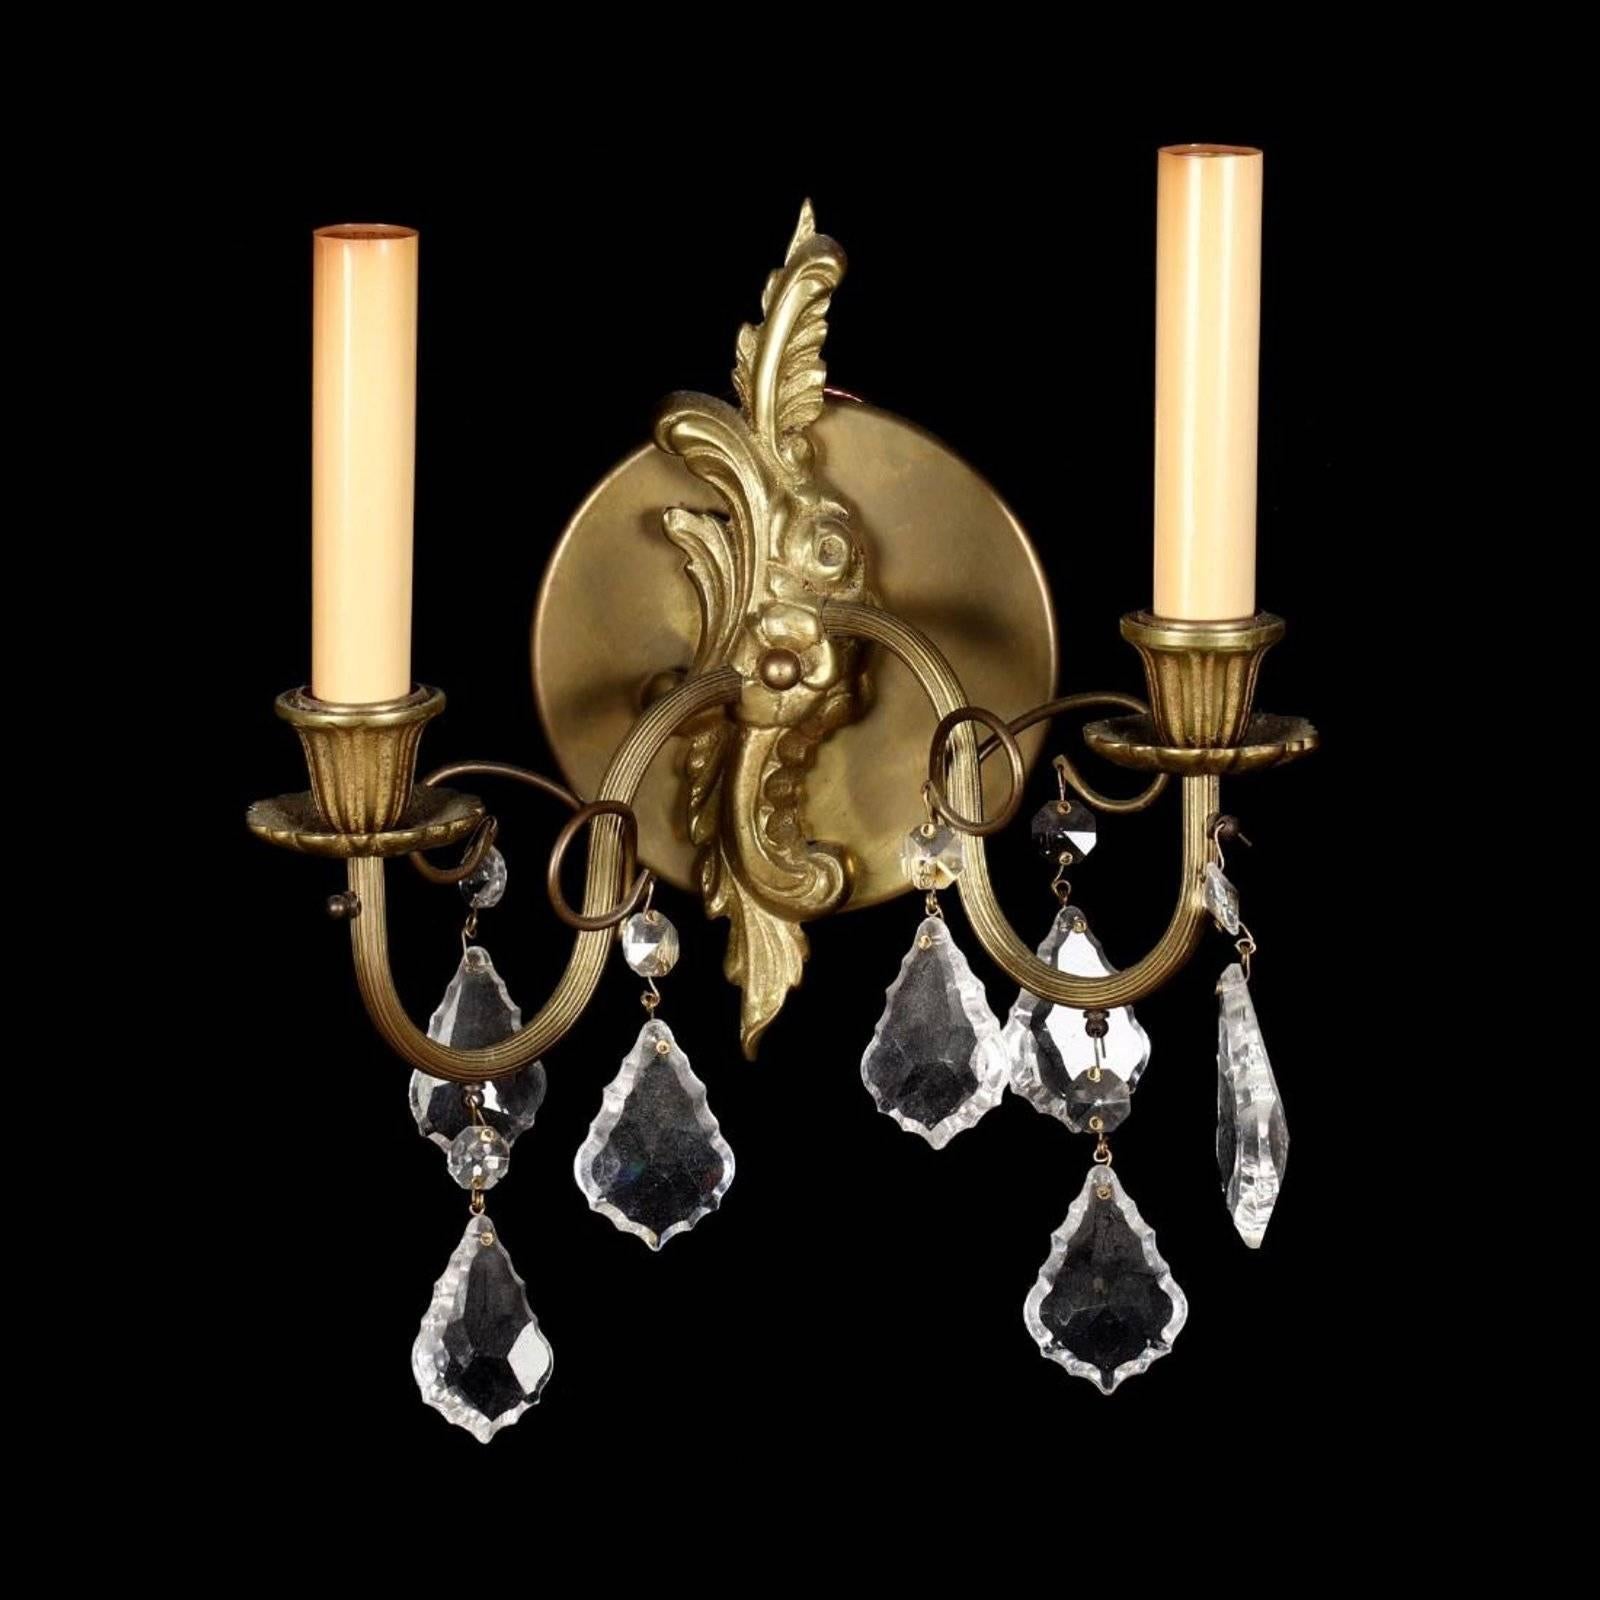 Mid-20th century pair of French Rococo style drop prism wall sconces with scrolled arms and cut glass drop prisms. Some missing prisms.